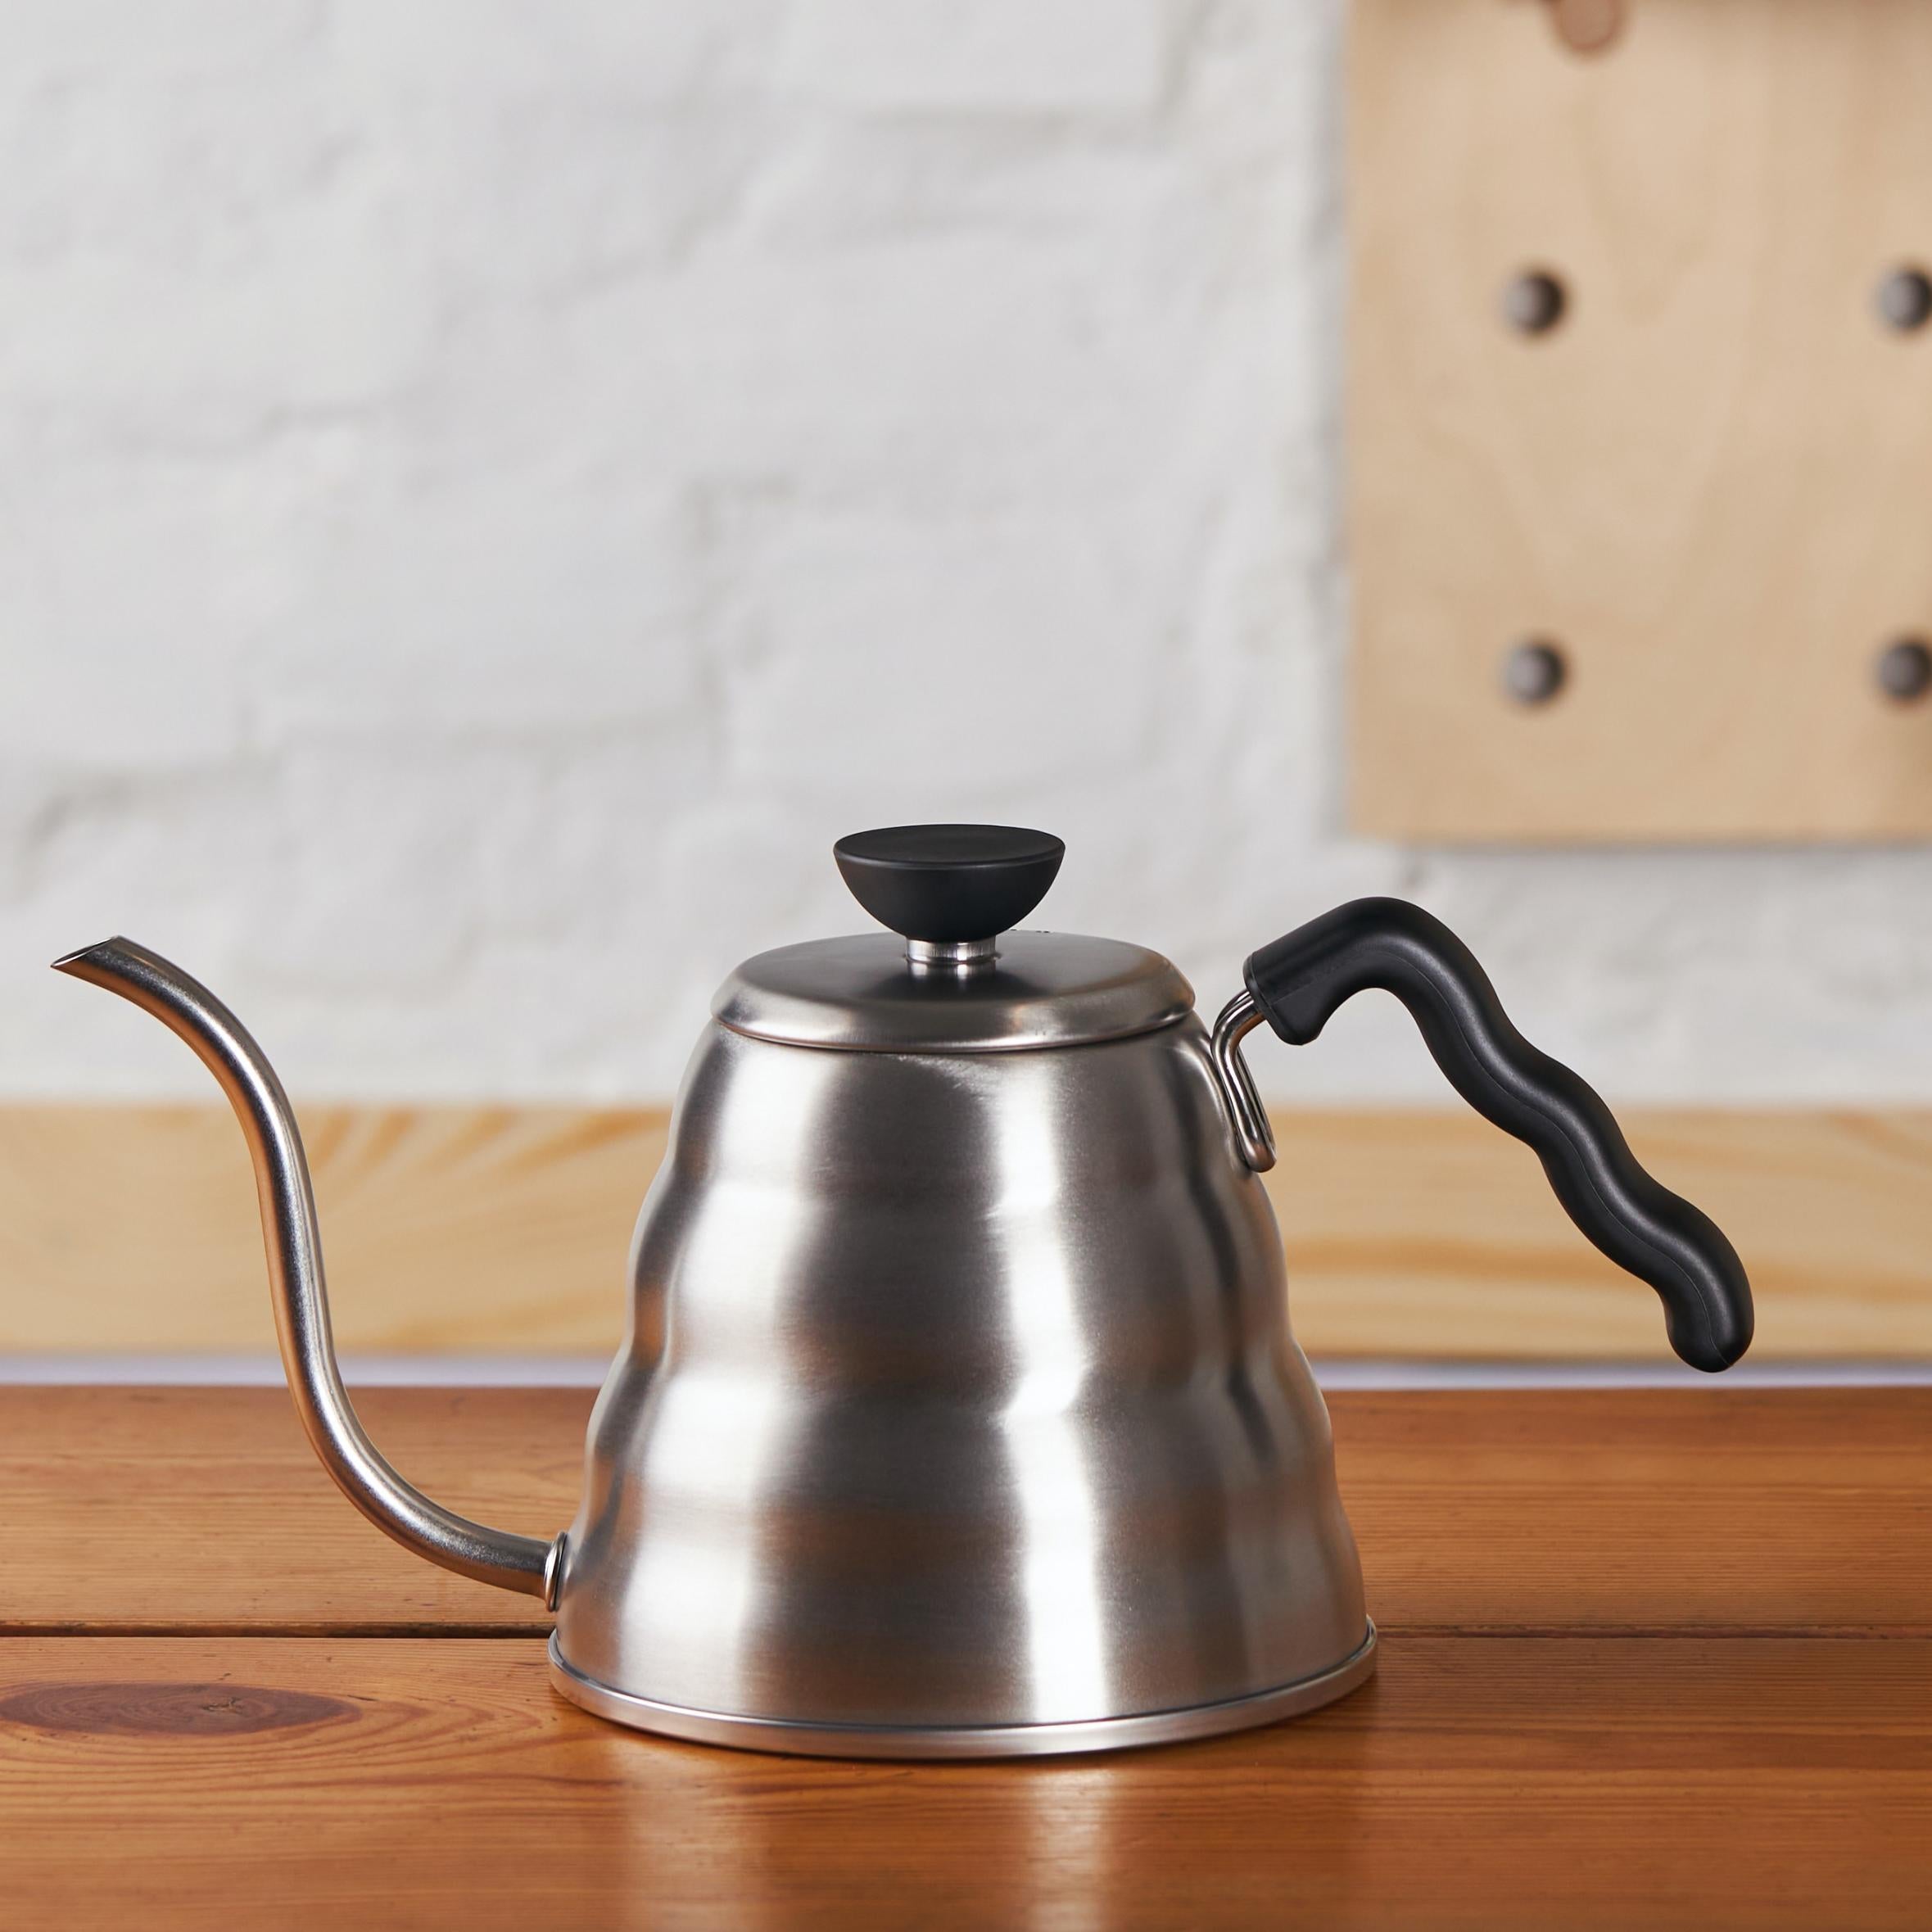 Hario Hario V60 Buono Coffee Drip Kettle Gooseneck Stainless Steel Pour Over Kettle 1L 